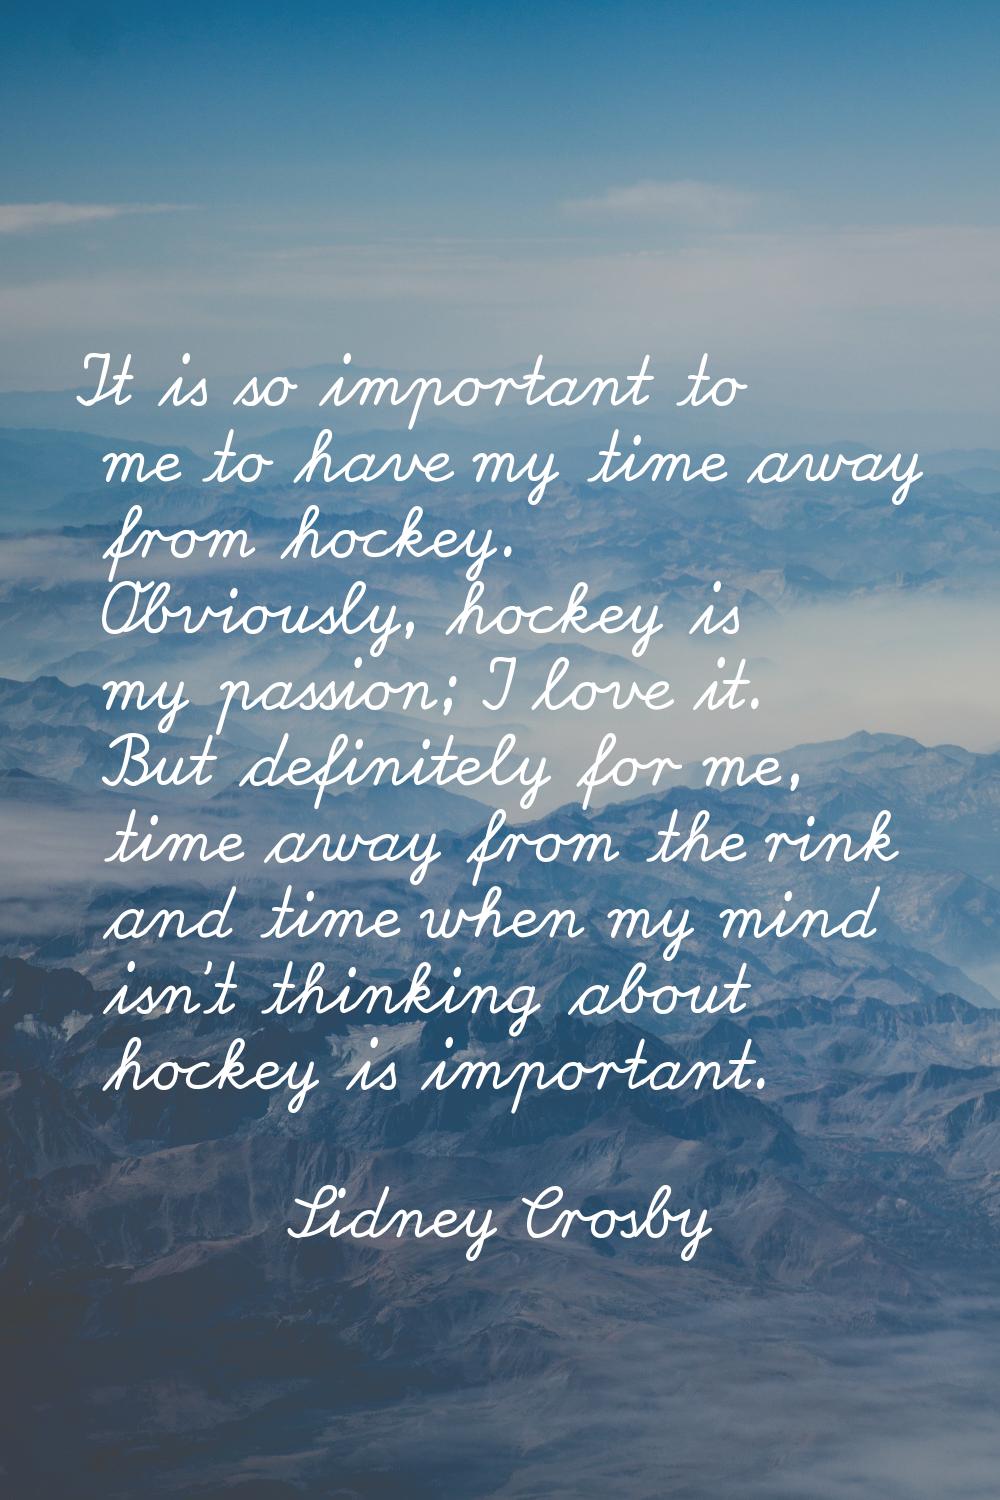 It is so important to me to have my time away from hockey. Obviously, hockey is my passion; I love 